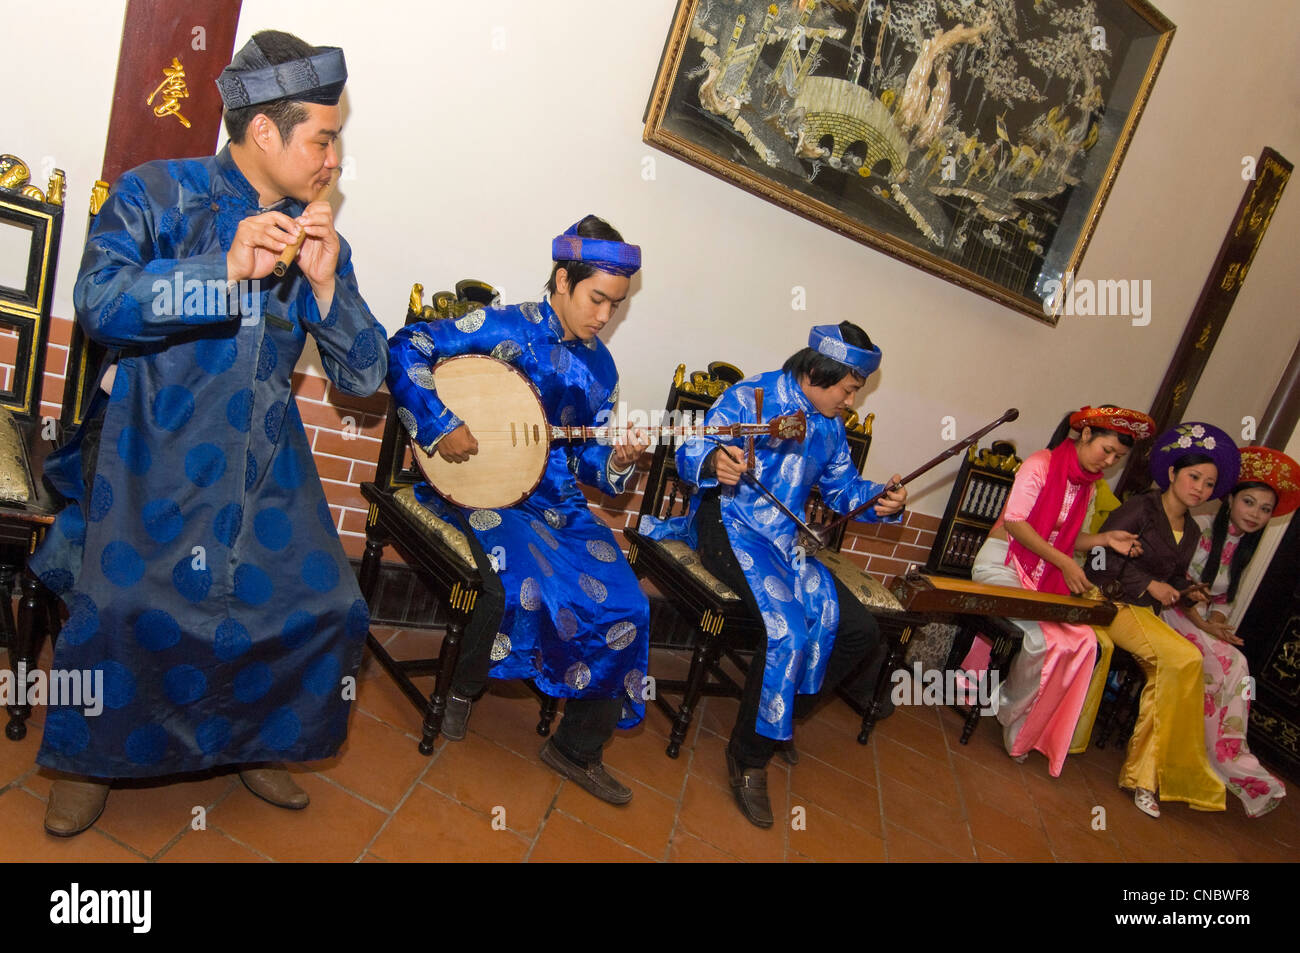 Horizontal view of a traditional Vietnamese troupe of musicians playing and singing traditional folklore songs in costume. Stock Photo